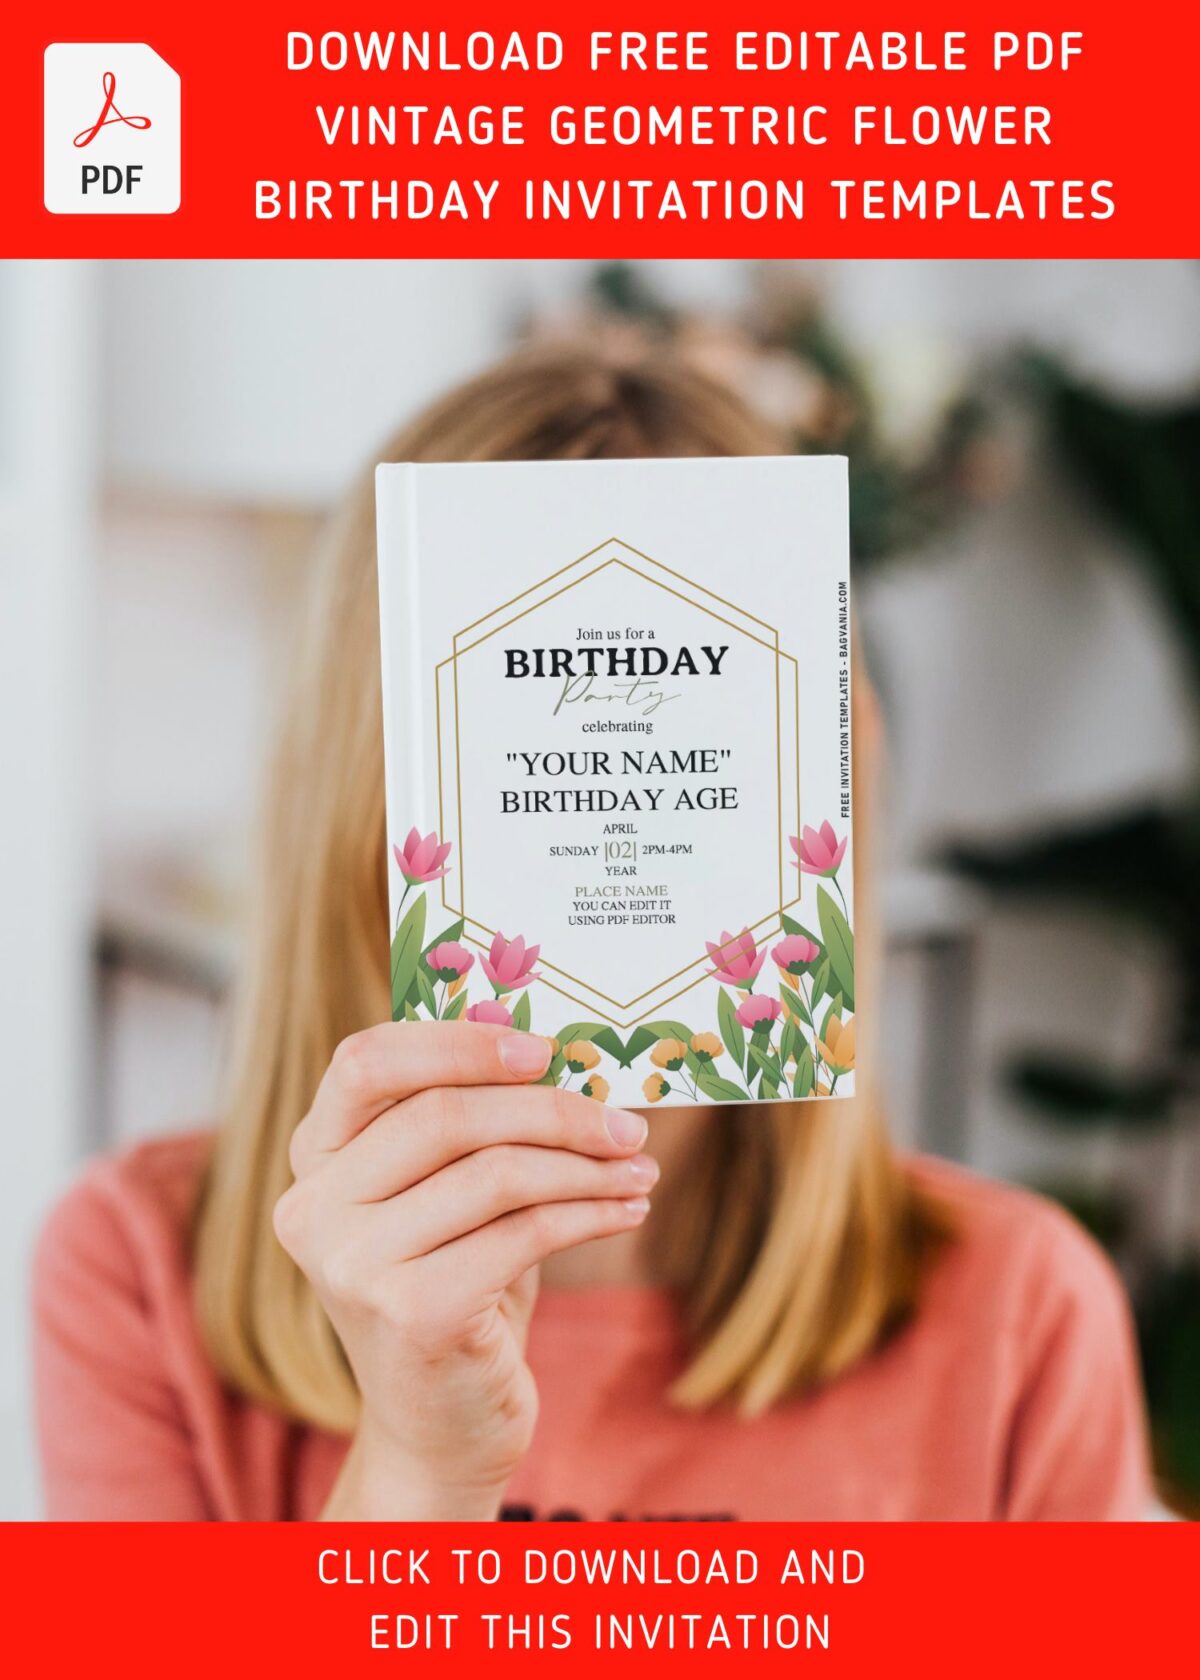 (Free Editable PDF) Geometric Gold And Floral Perfection Birthday Invitation Templates with spring garden flowers